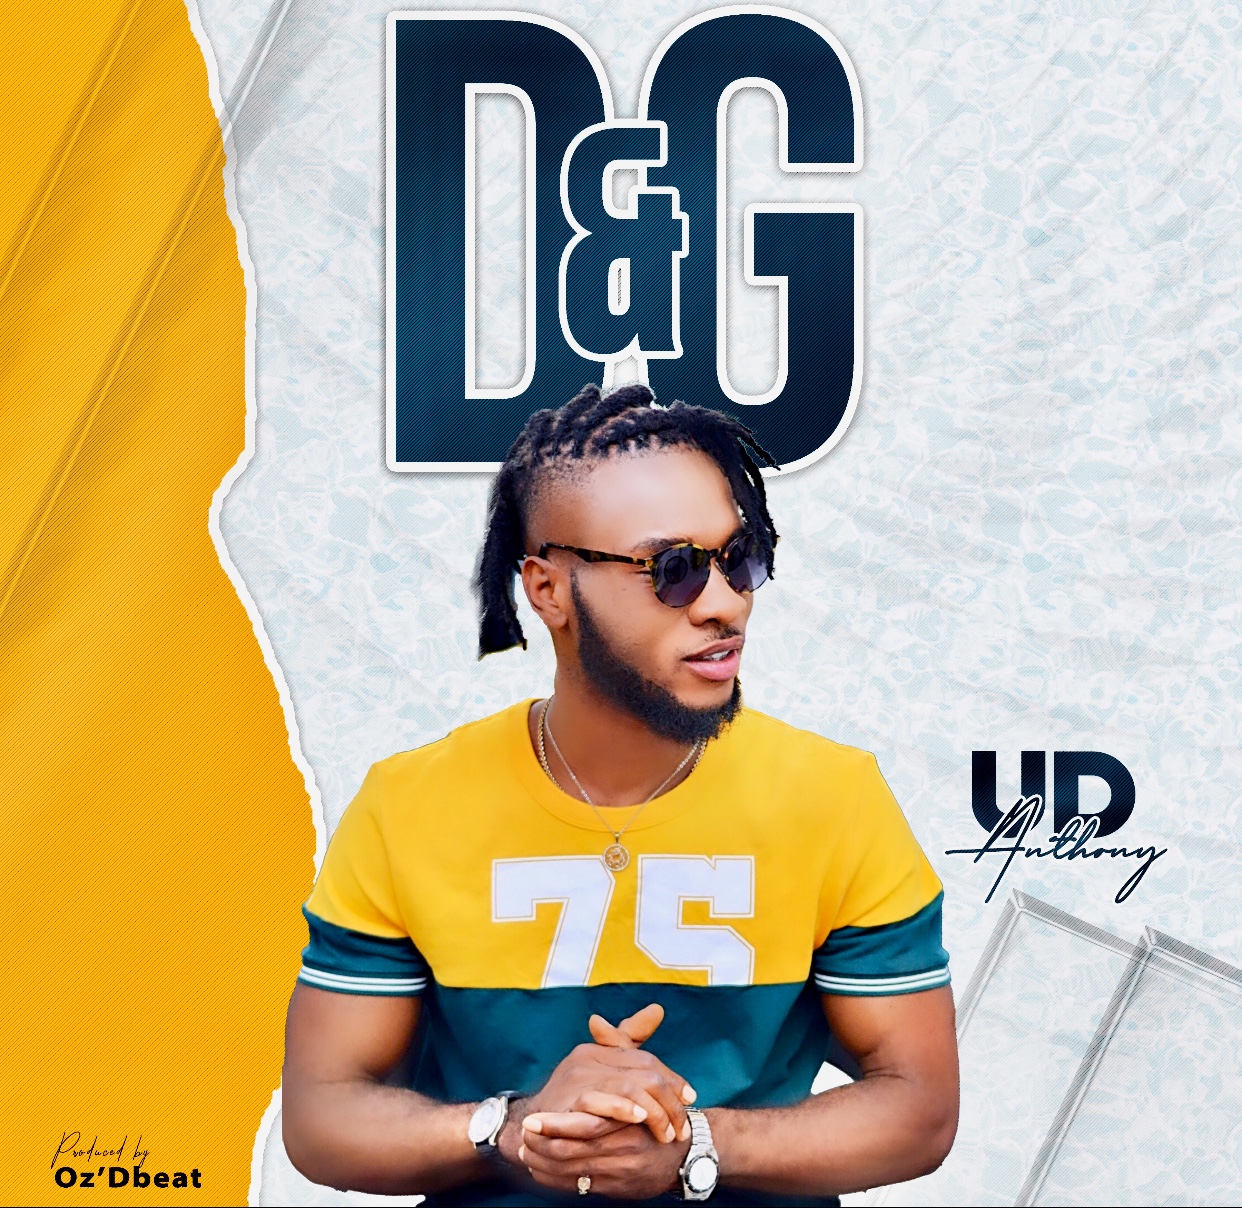 UD ANTHONY starts the year on a high note with a brand new single titled “D & G”.